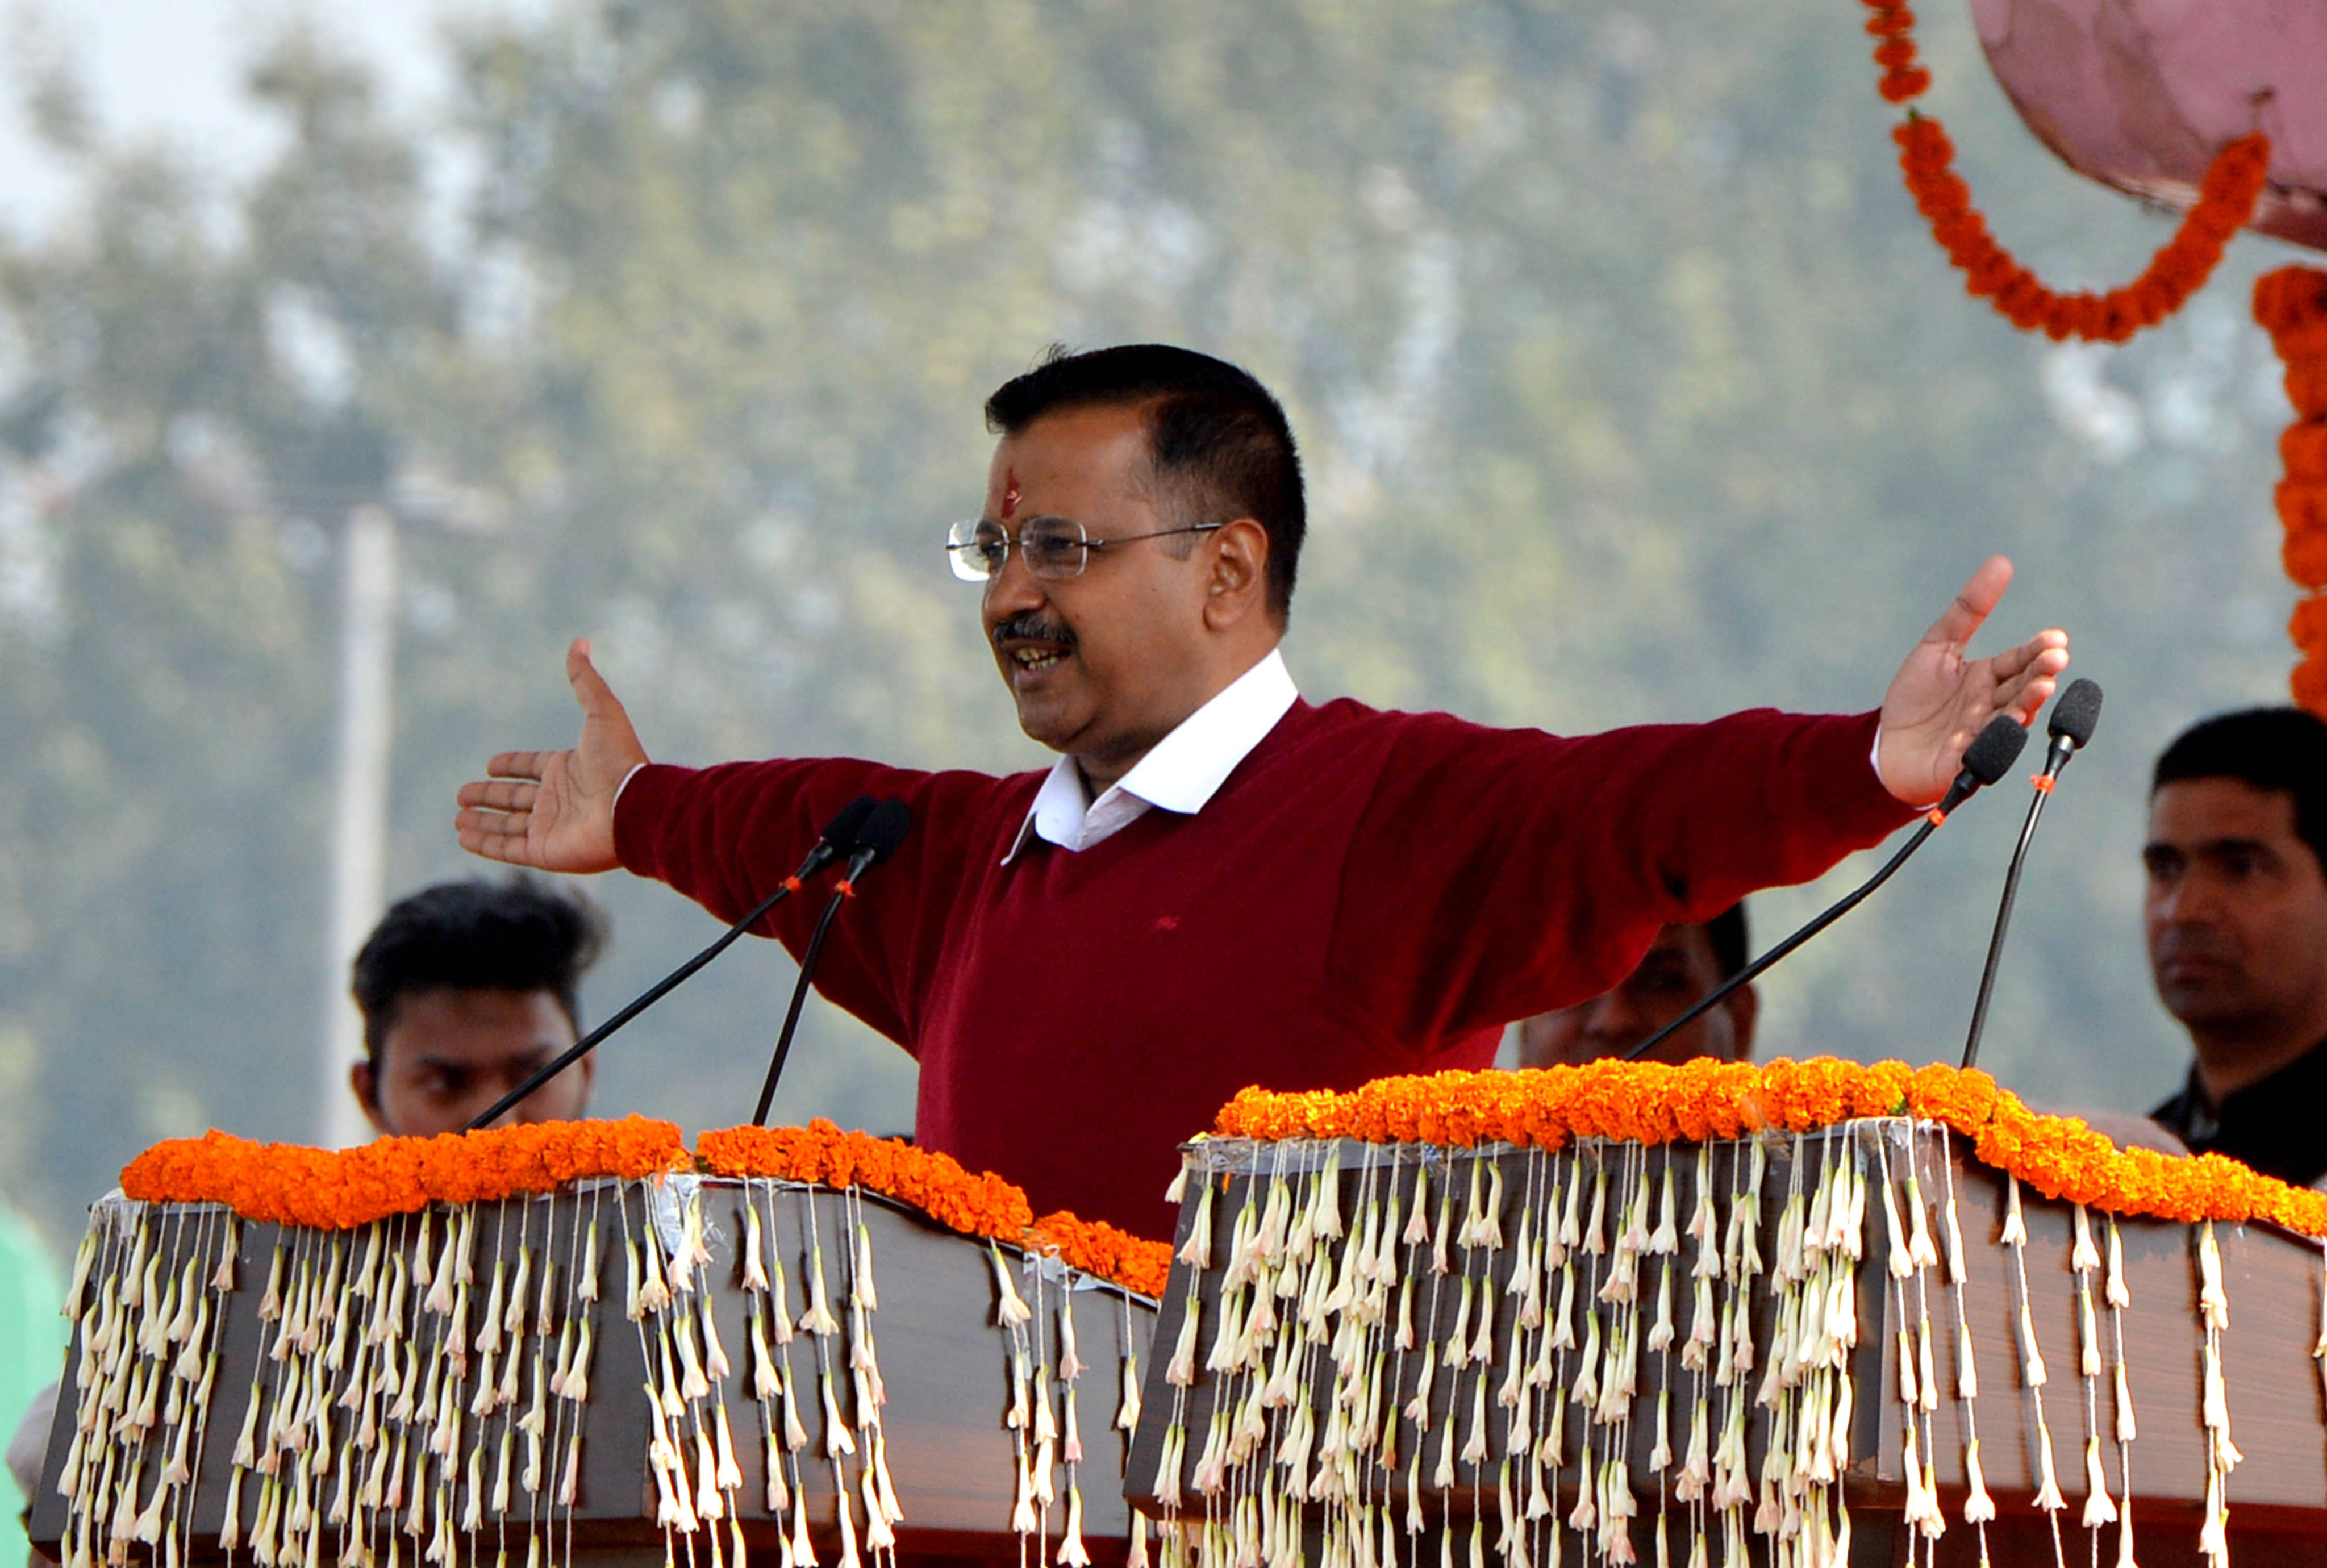 Arvind Kejriwal addresses the crowd after taking oath as Delhi Chief Minister in New Delhi, on February 16, 2020. Photo: Xinhua